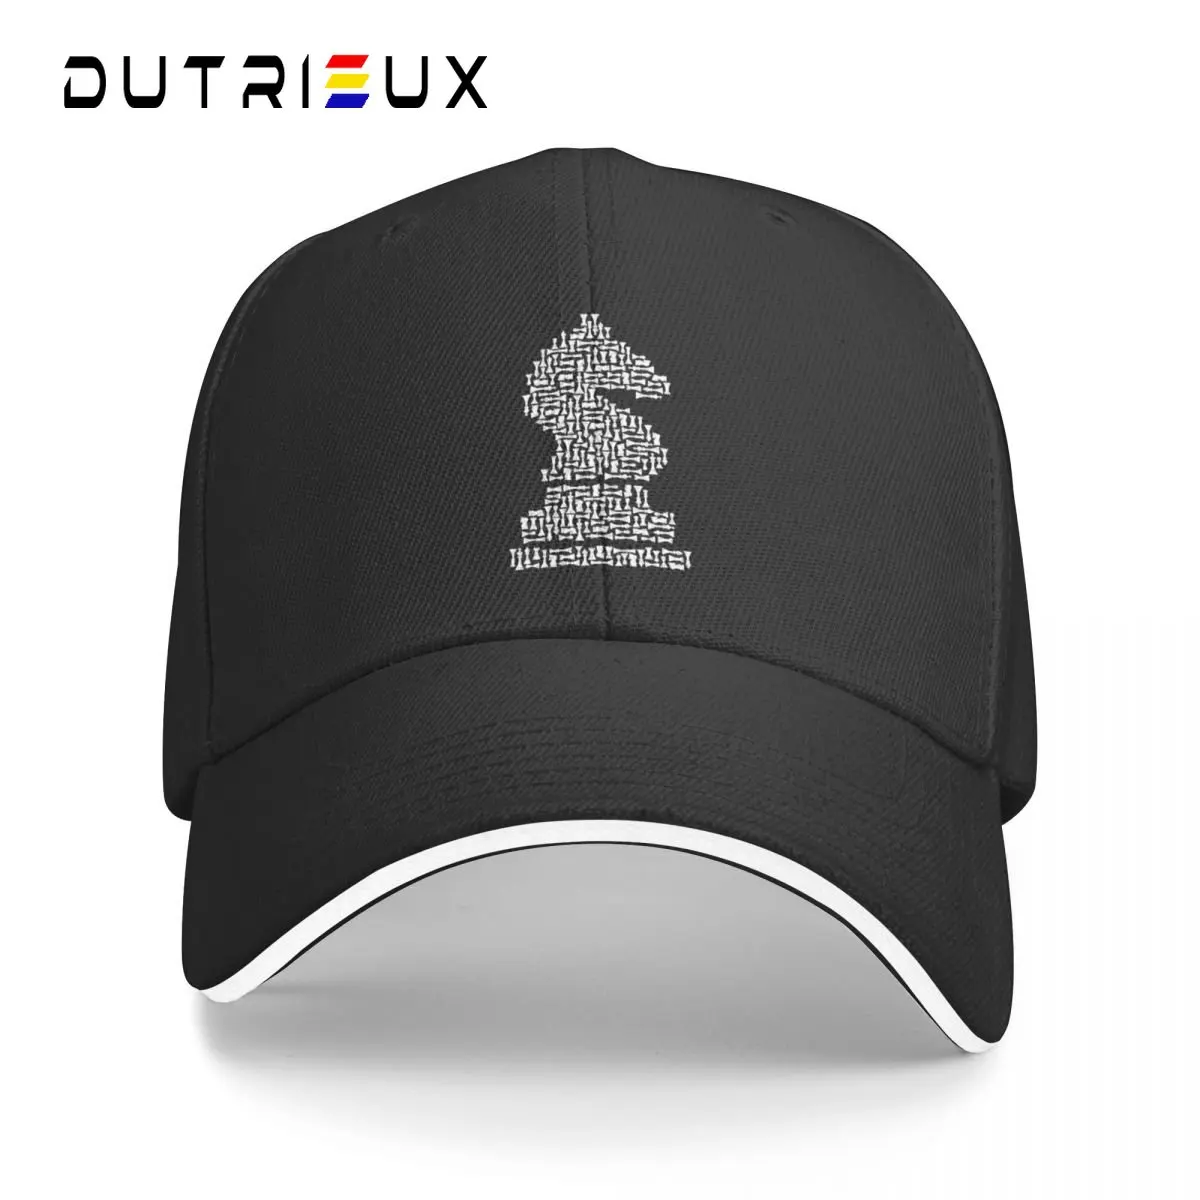 

Baseball Hat For Men Women White Chess Knight Piece Mosaic Caps Golf Snapback Caps Hats For Winter